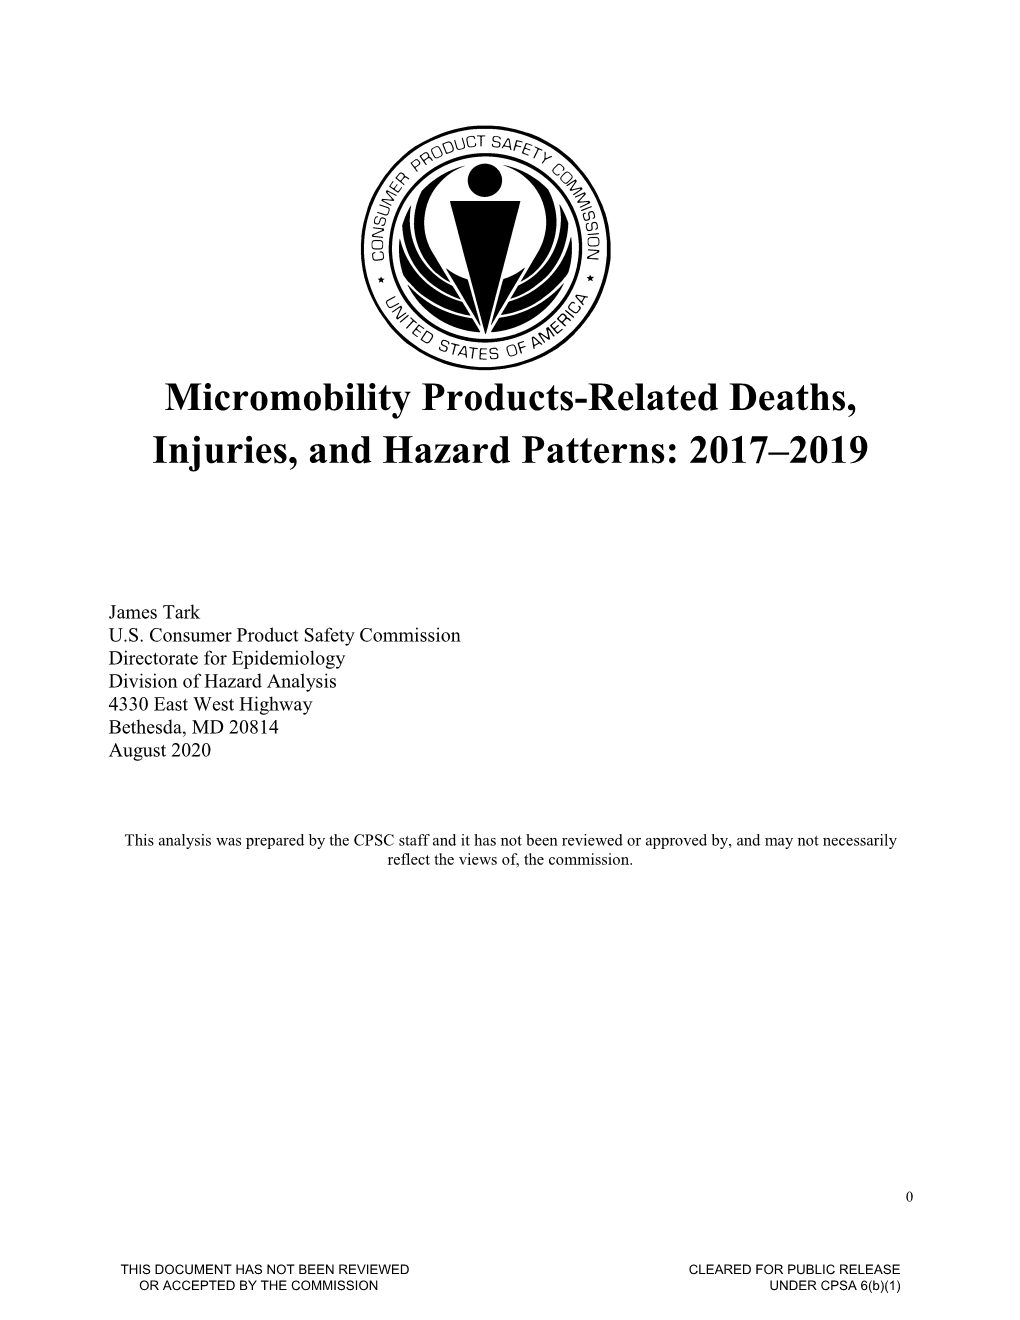 Micromobility Products-Related Deaths, Injuries, and Hazard Patterns: 2017–2019